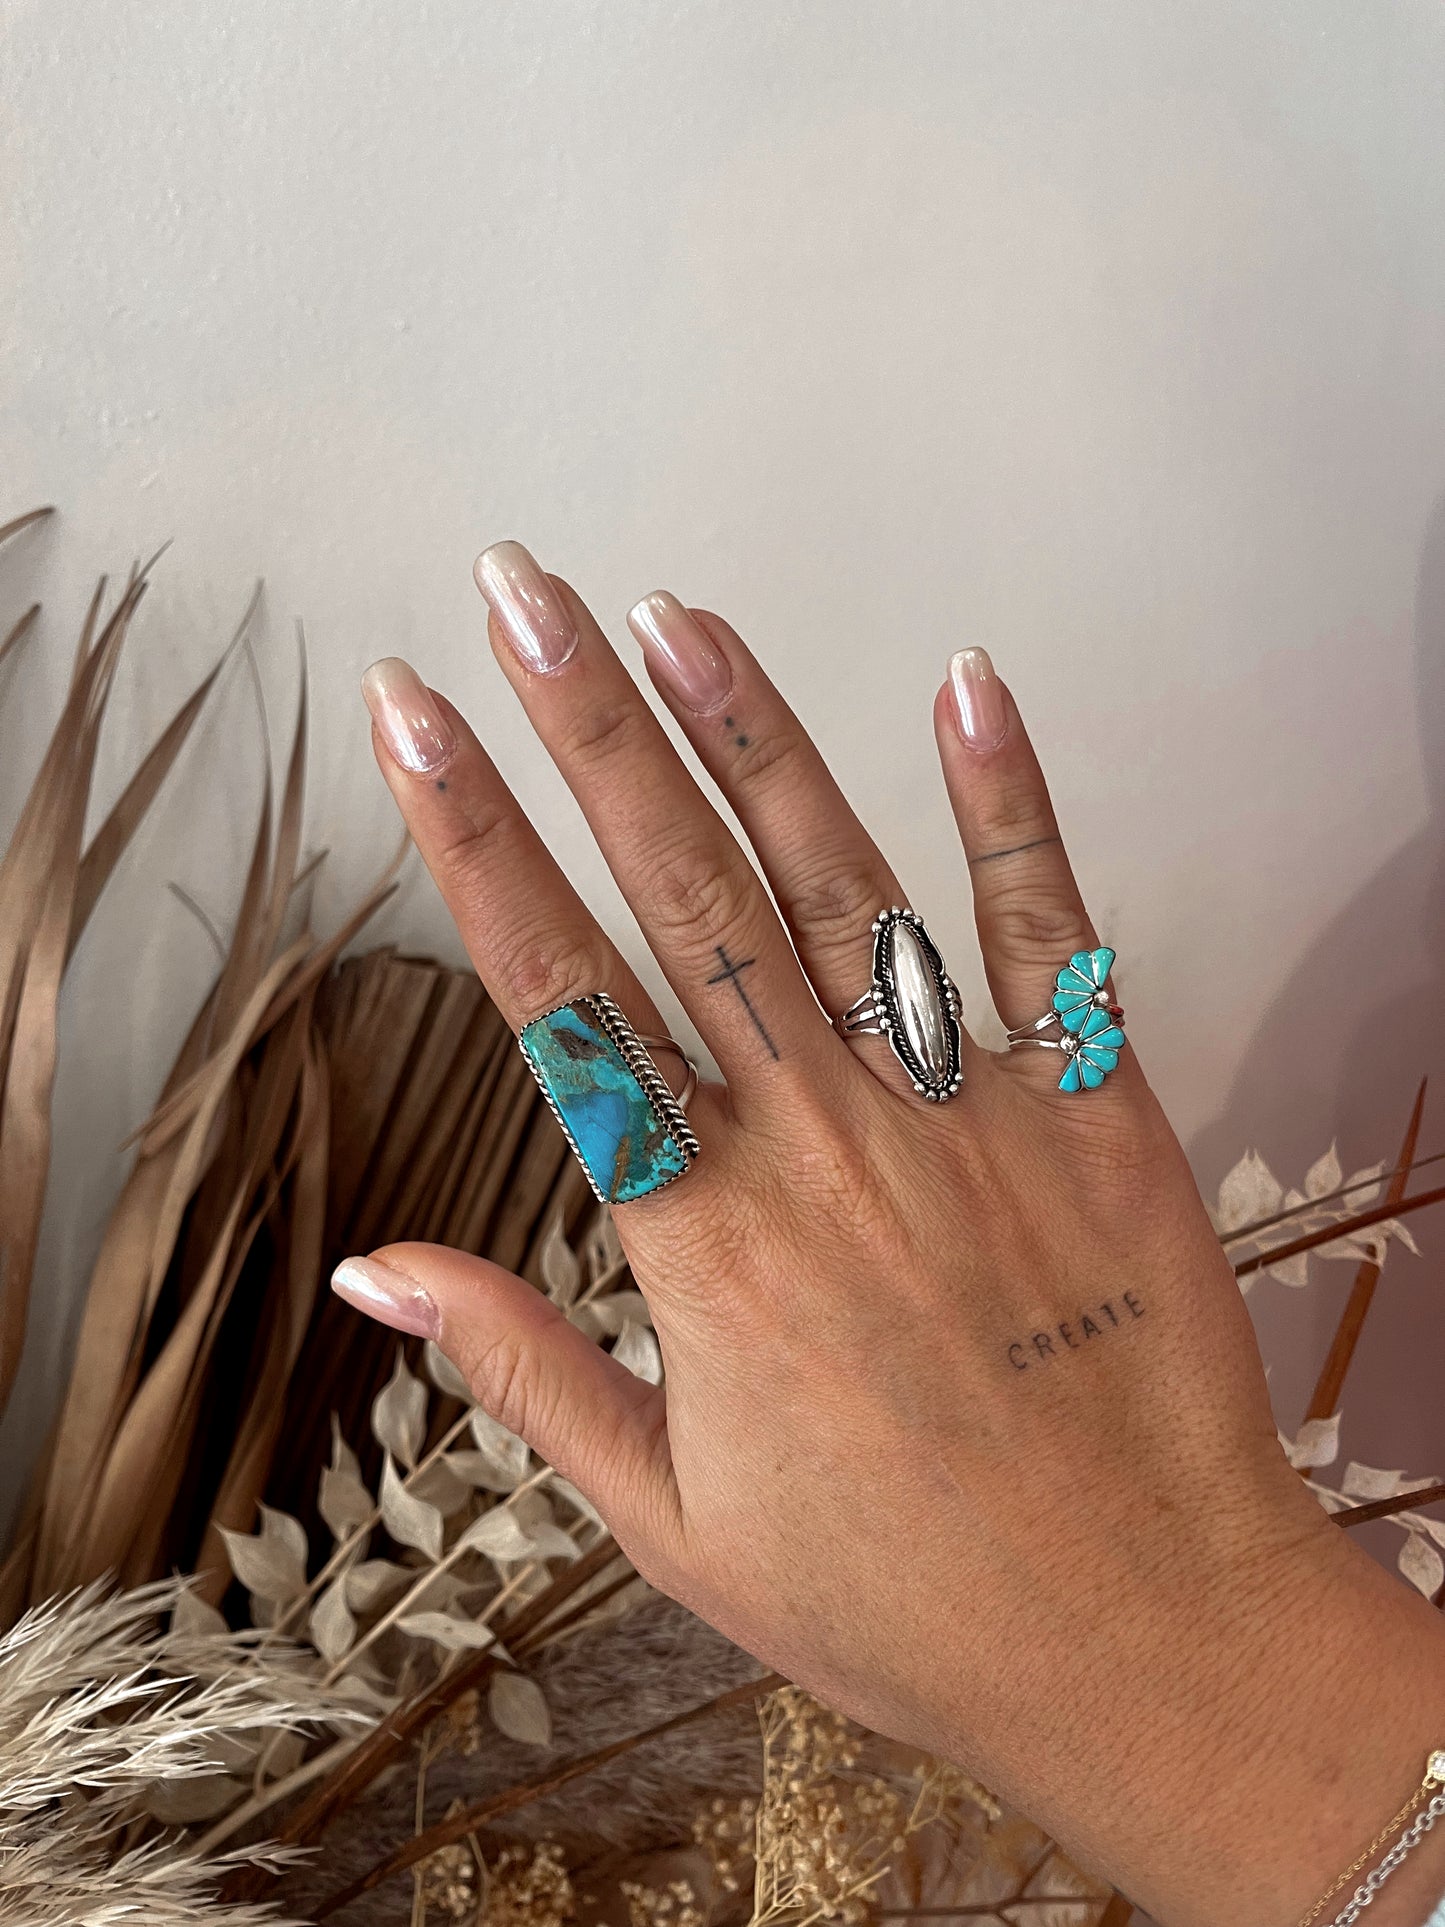 The Vintage Turquoise Marble Ring